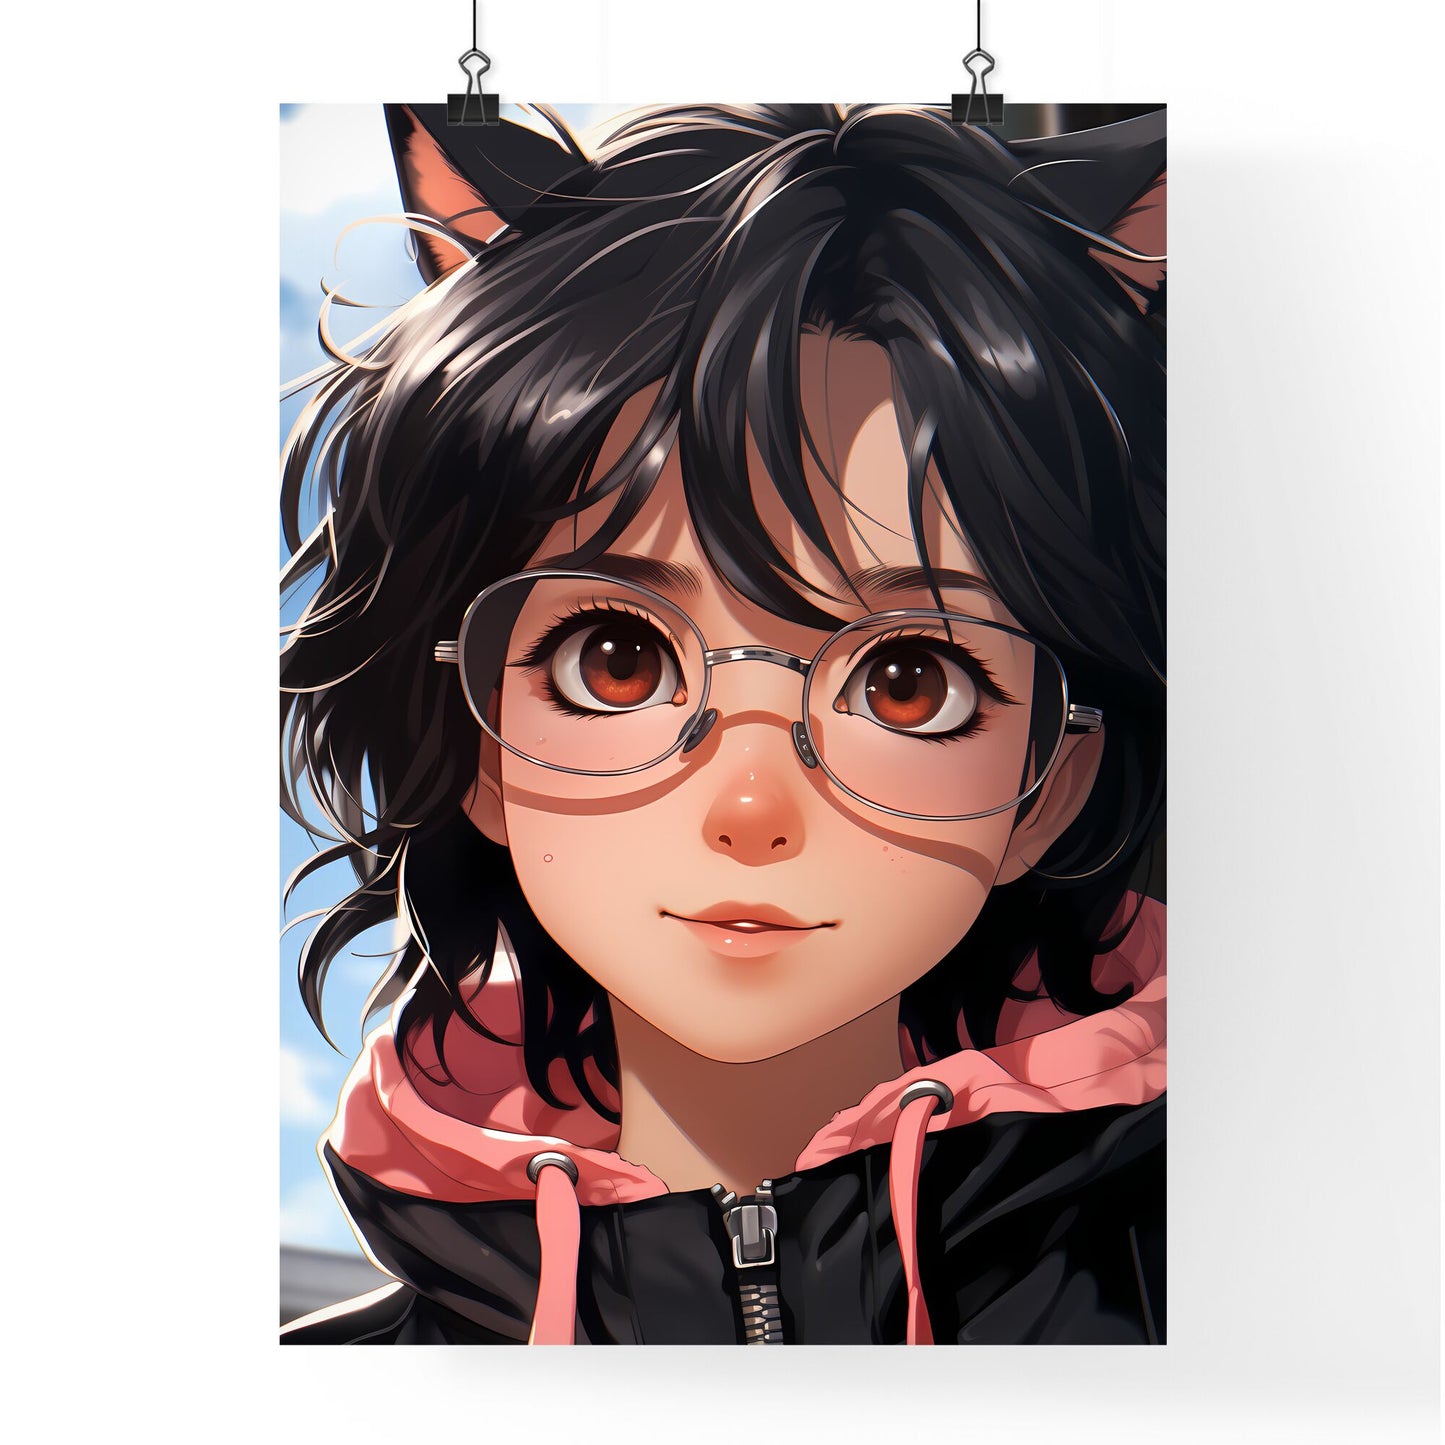 A Cartoon Girl With Glasses And Ears Default Title